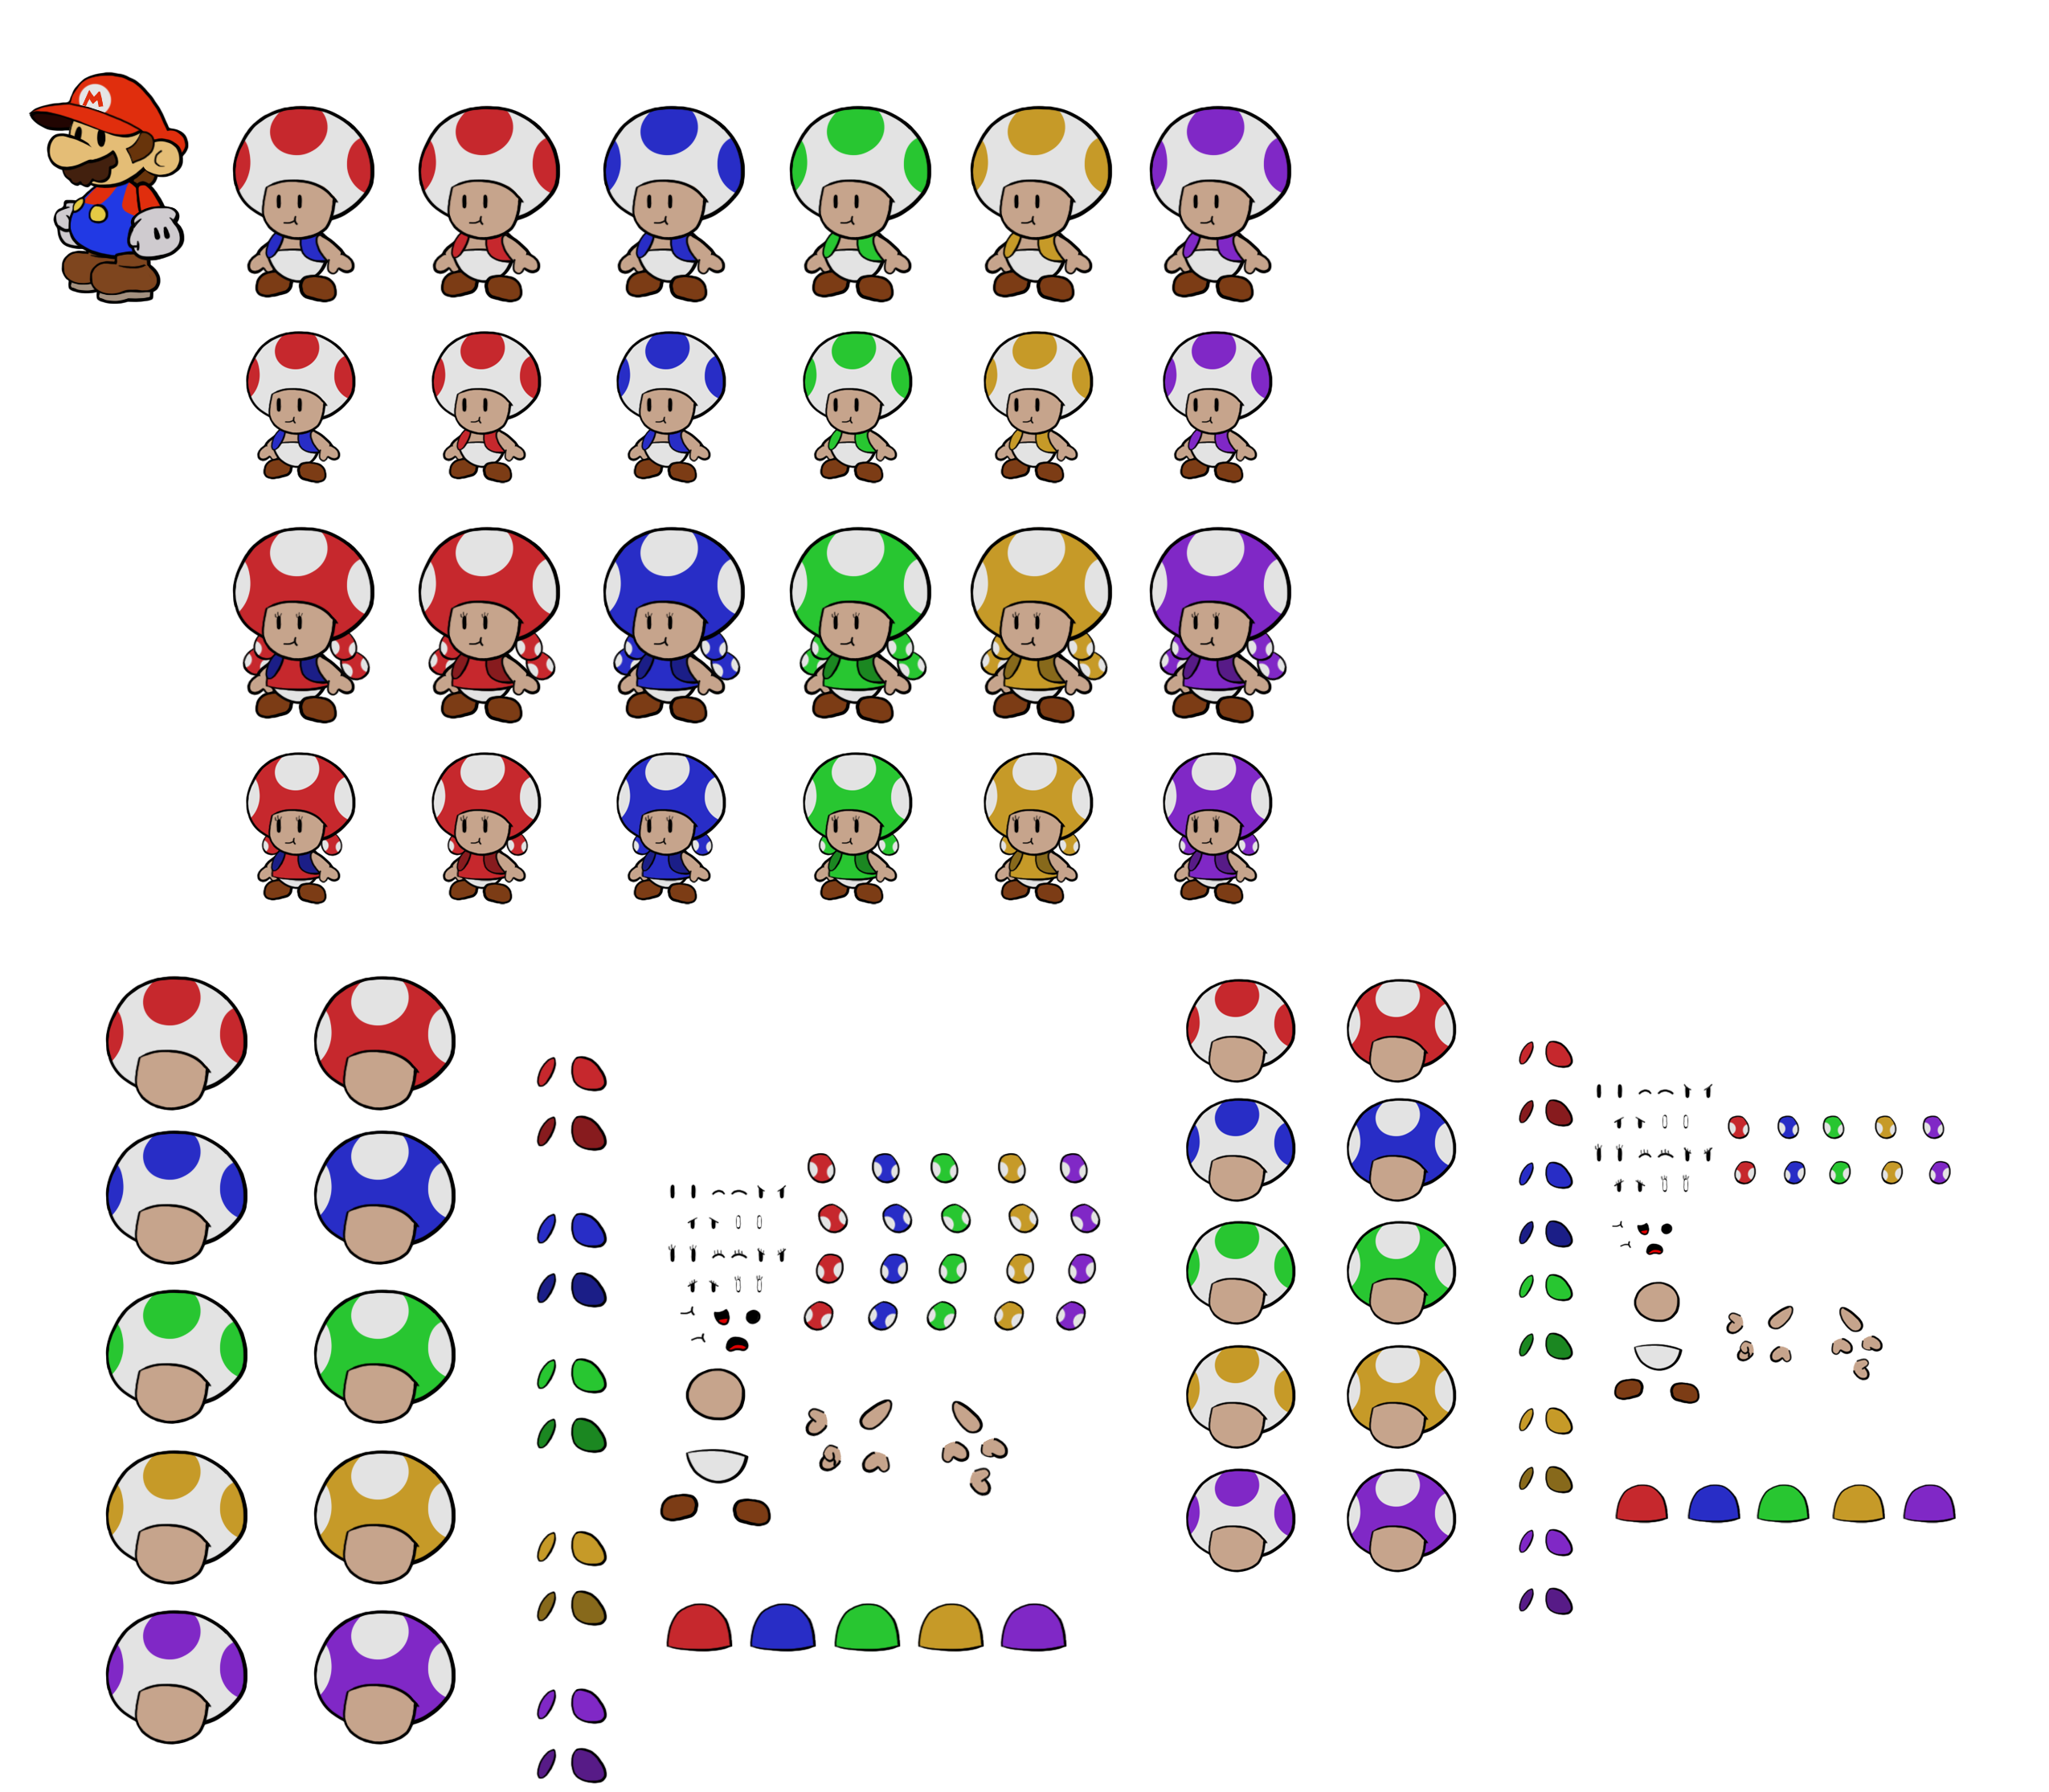 Mario Customs - Toads & Toadettes (Paper Mario-Style)